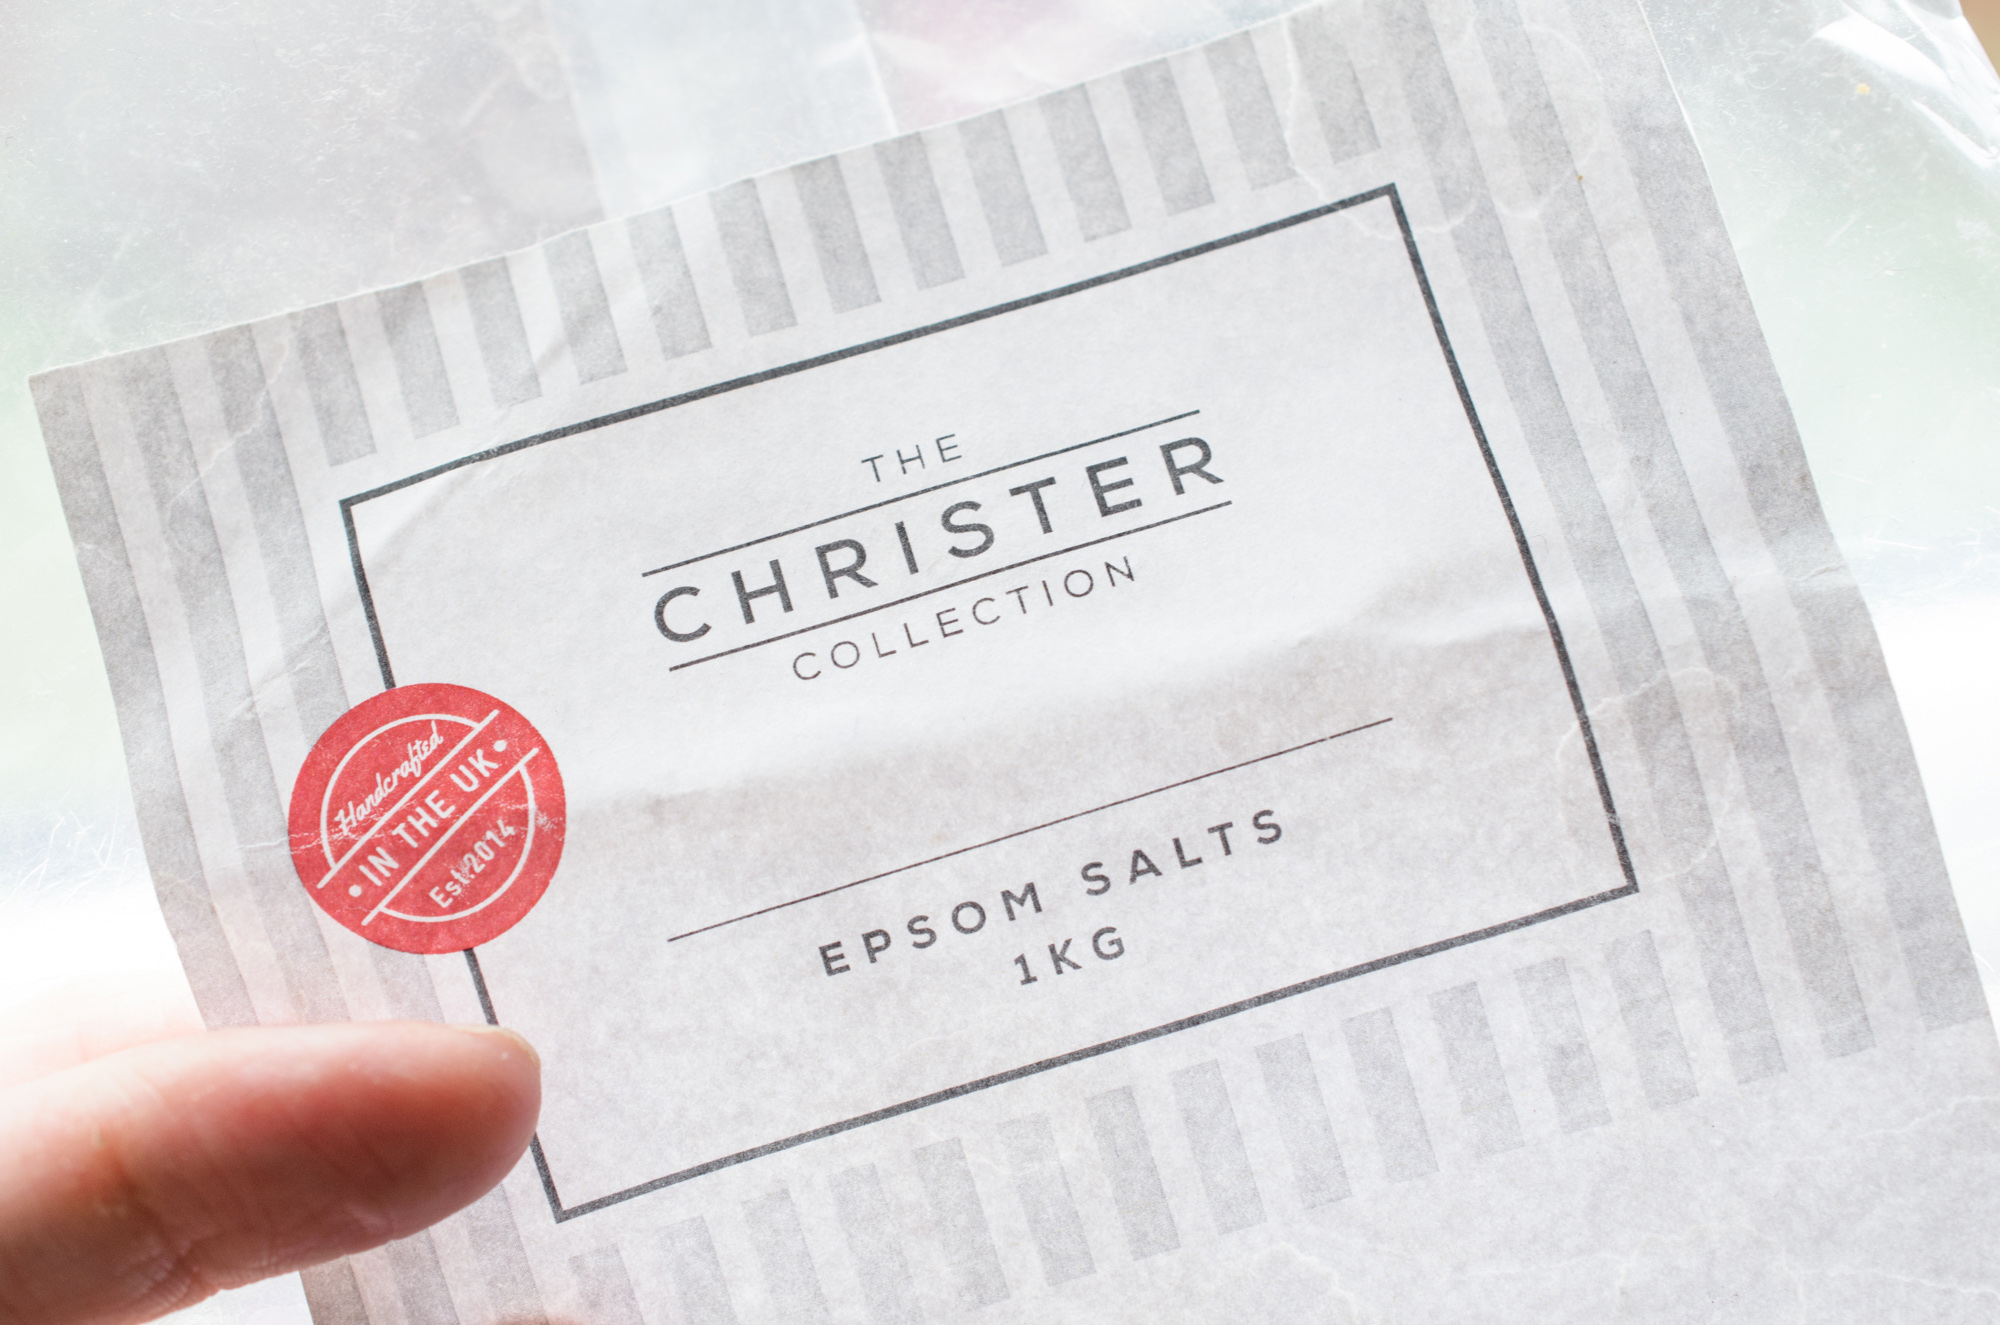 The Christer Collection Epsom Salts